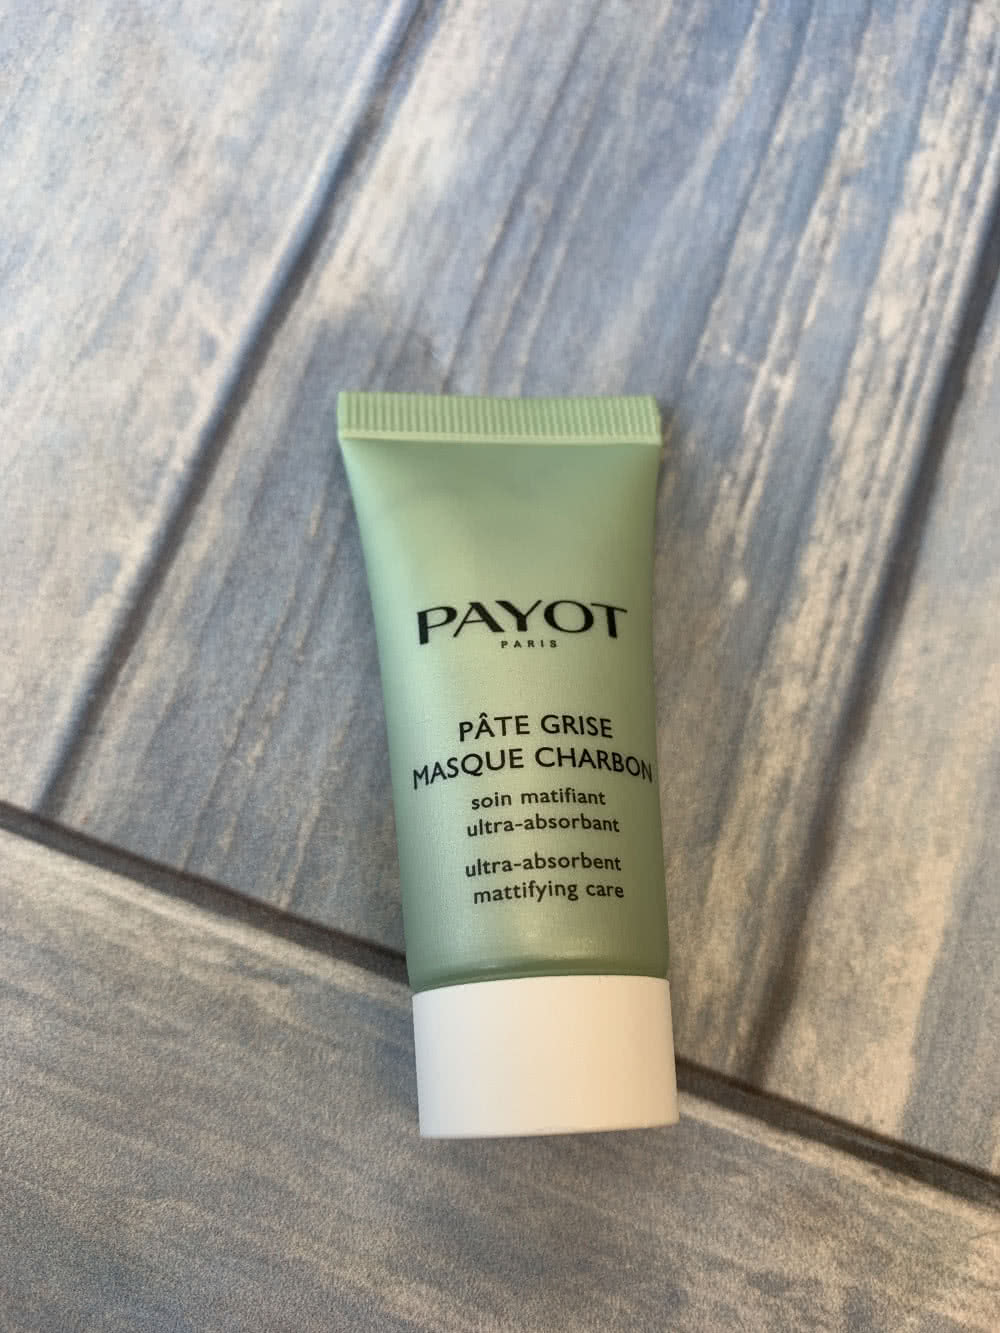 Payot, Pate Grise Masque Charbon, 15ml